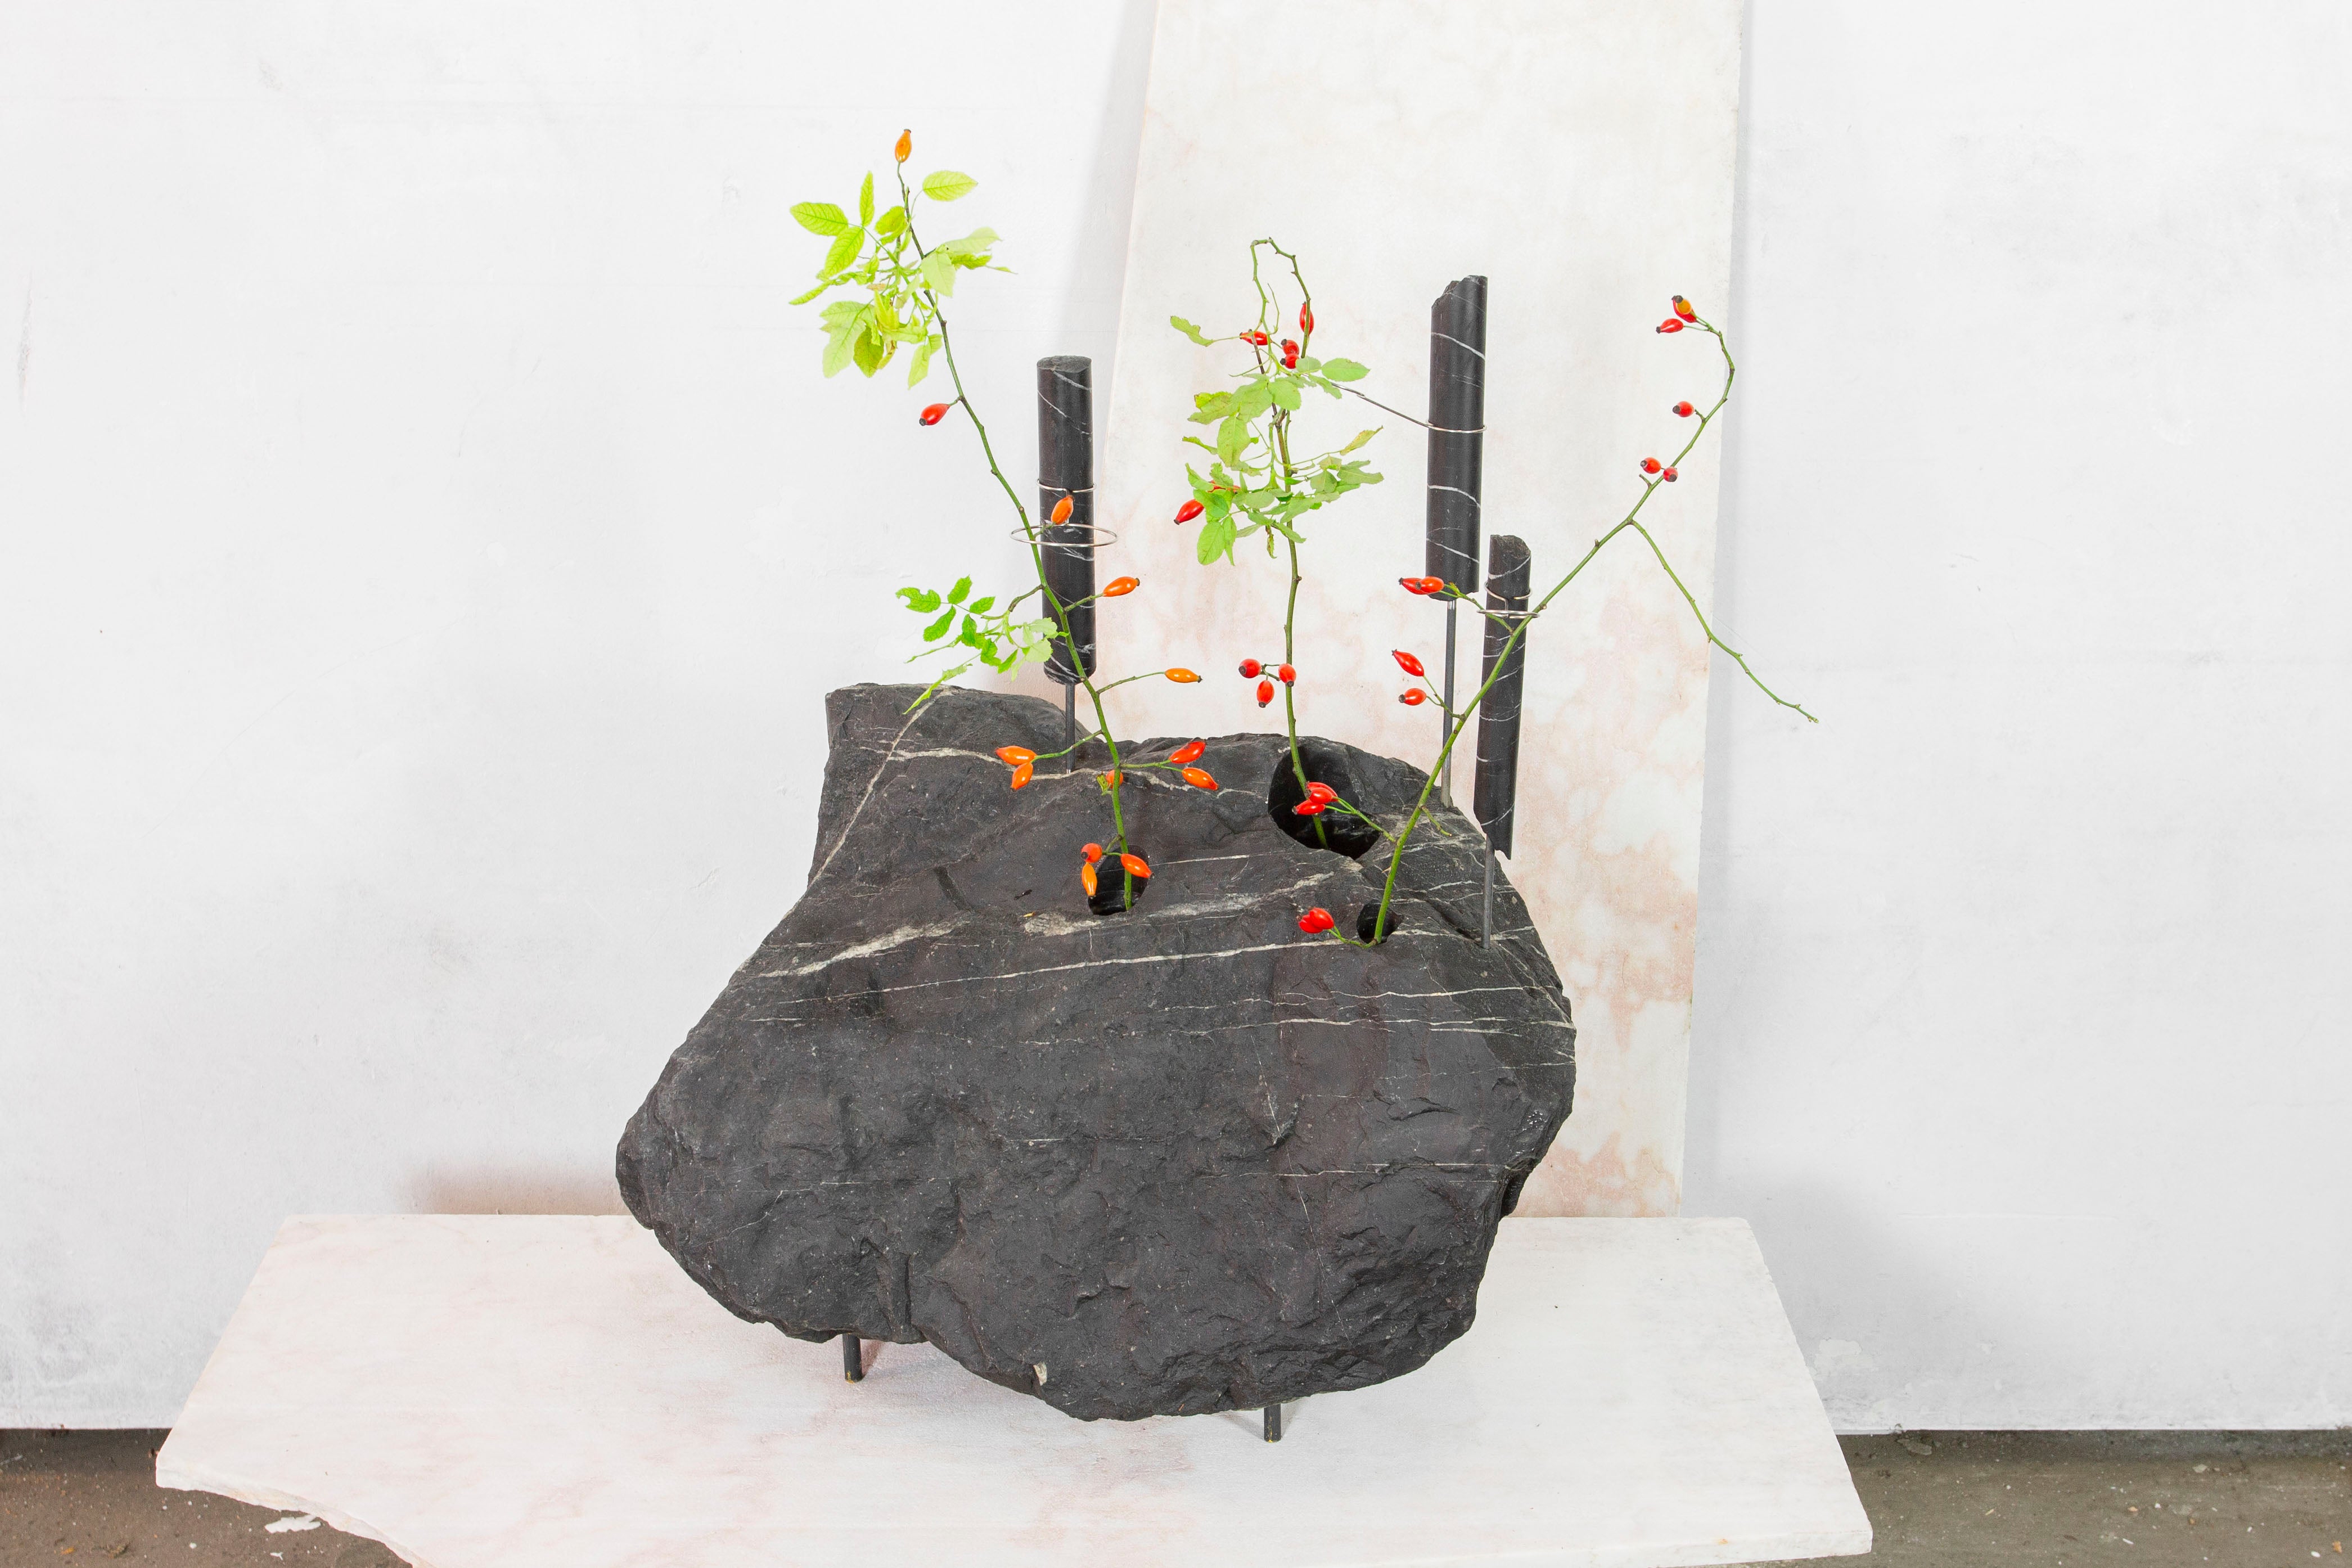 Big Blue Flower Vessel by Studio DO
Dimensions: D 63 x W 31 x H 70 cm
Materials: Stone, steel.

Flowers are intrinsically connected with composition and earth.
Influenced by varied vessels from past to present such as the dutch tulip vase and